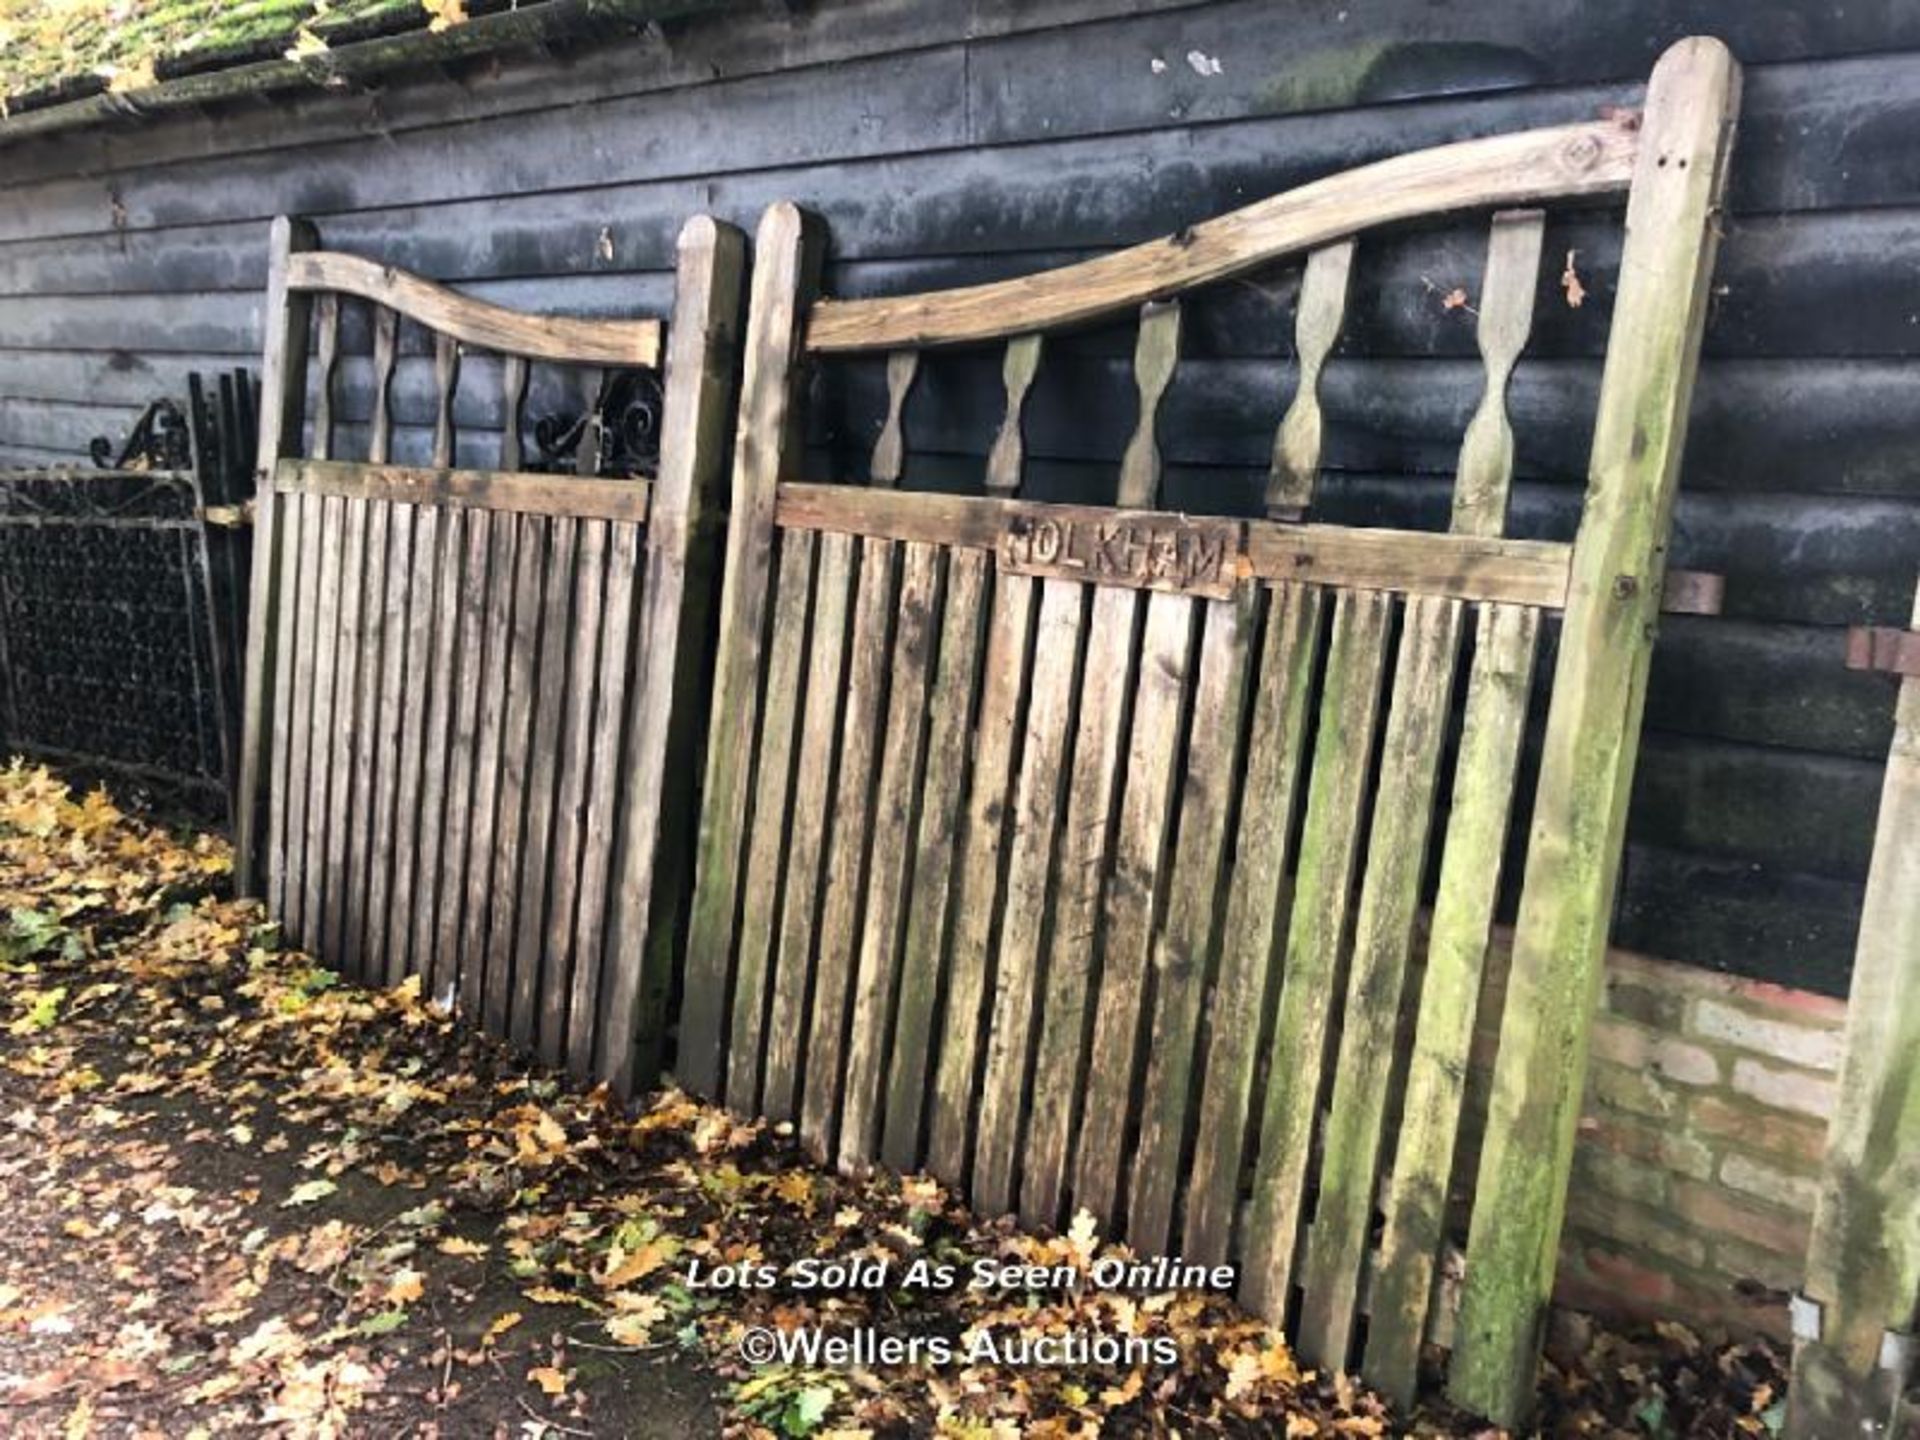 *PAIR OF 'HOLKHAM' MATERIAL PINE DRIVEWAY GATES, / ITEM LOCATION: GU8, FULL ADDRESS WILL BE GIVEN